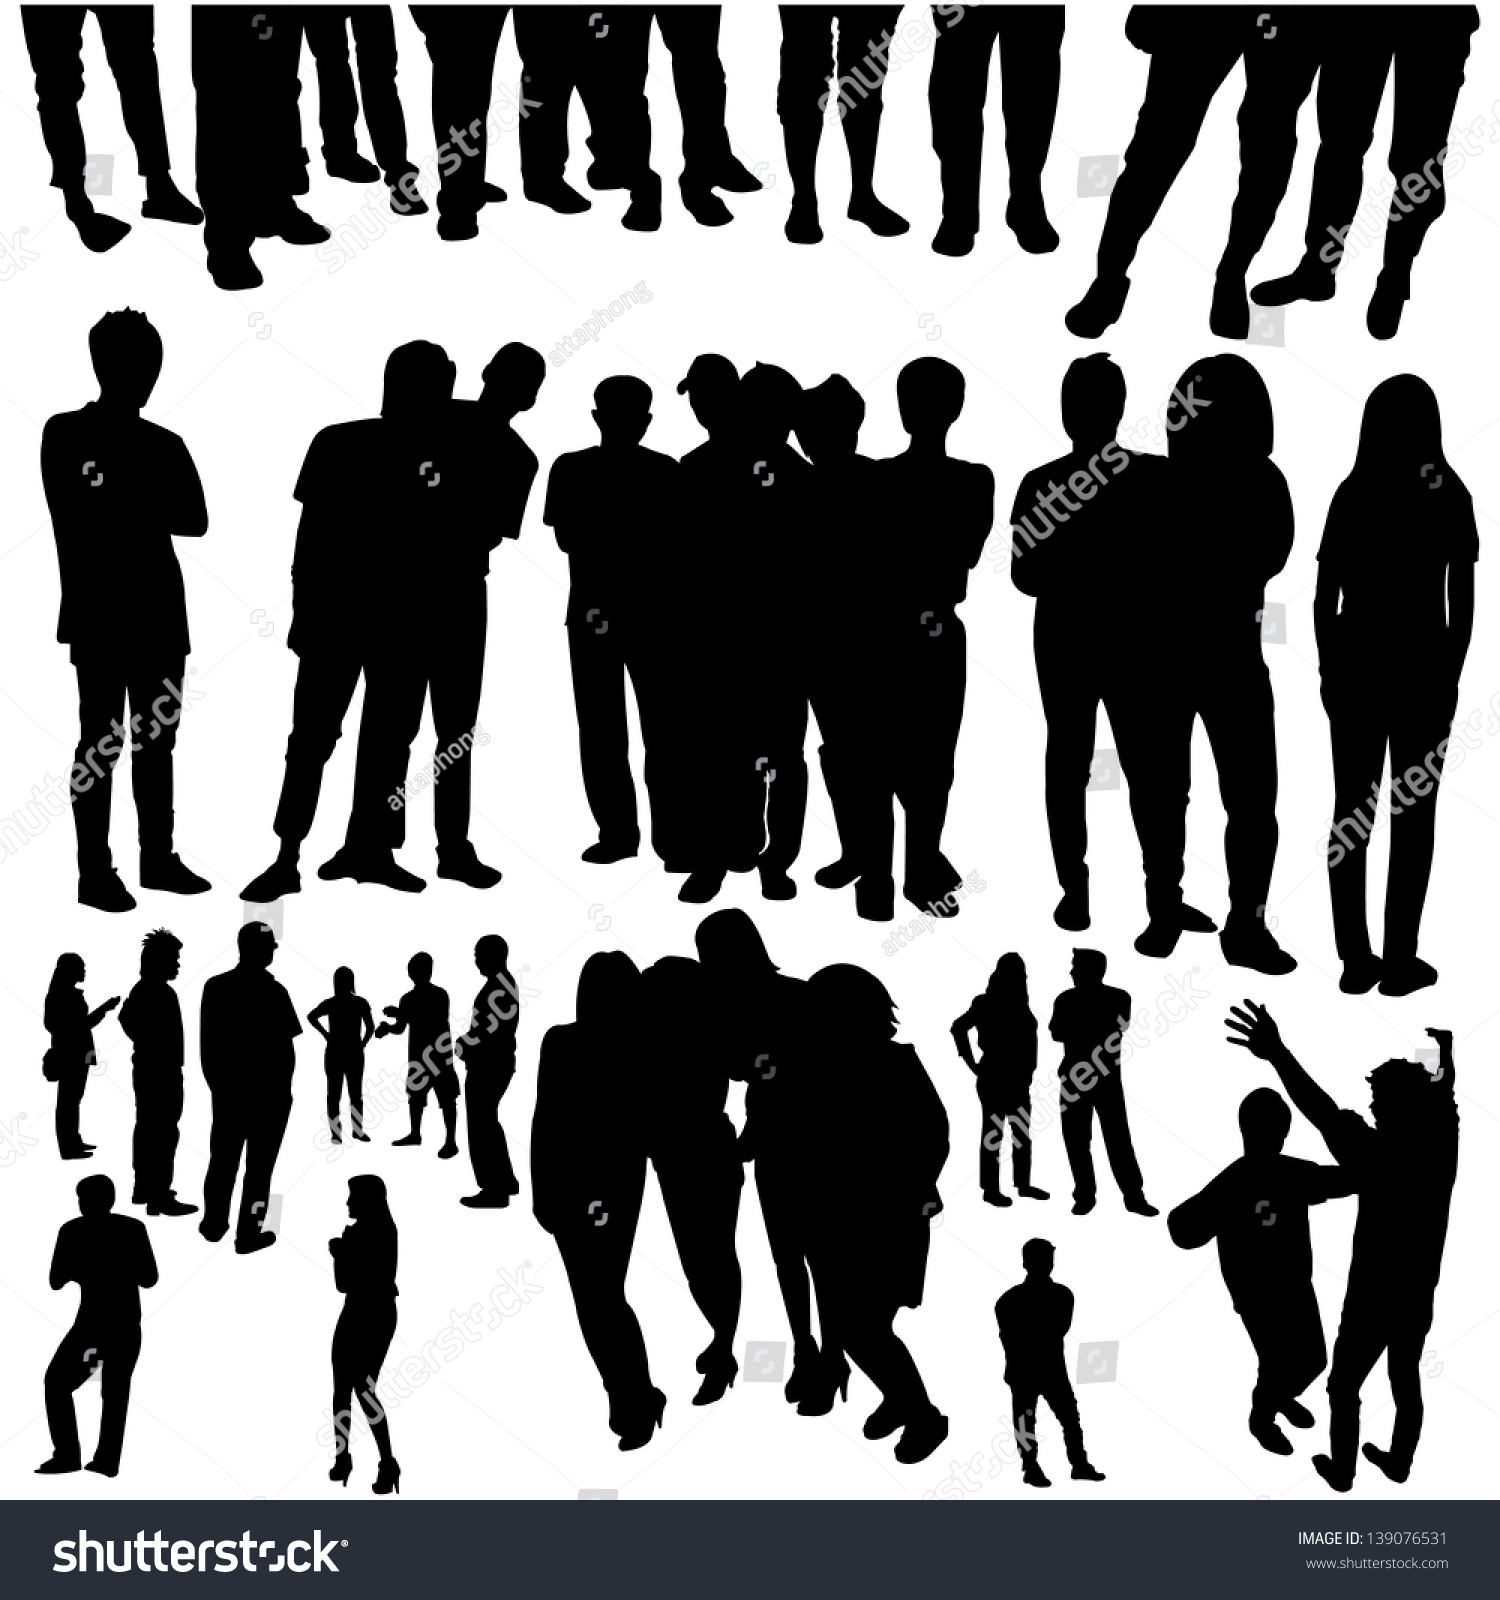 Crowded People Silhouette Vector - 139076531 : Shutterstock